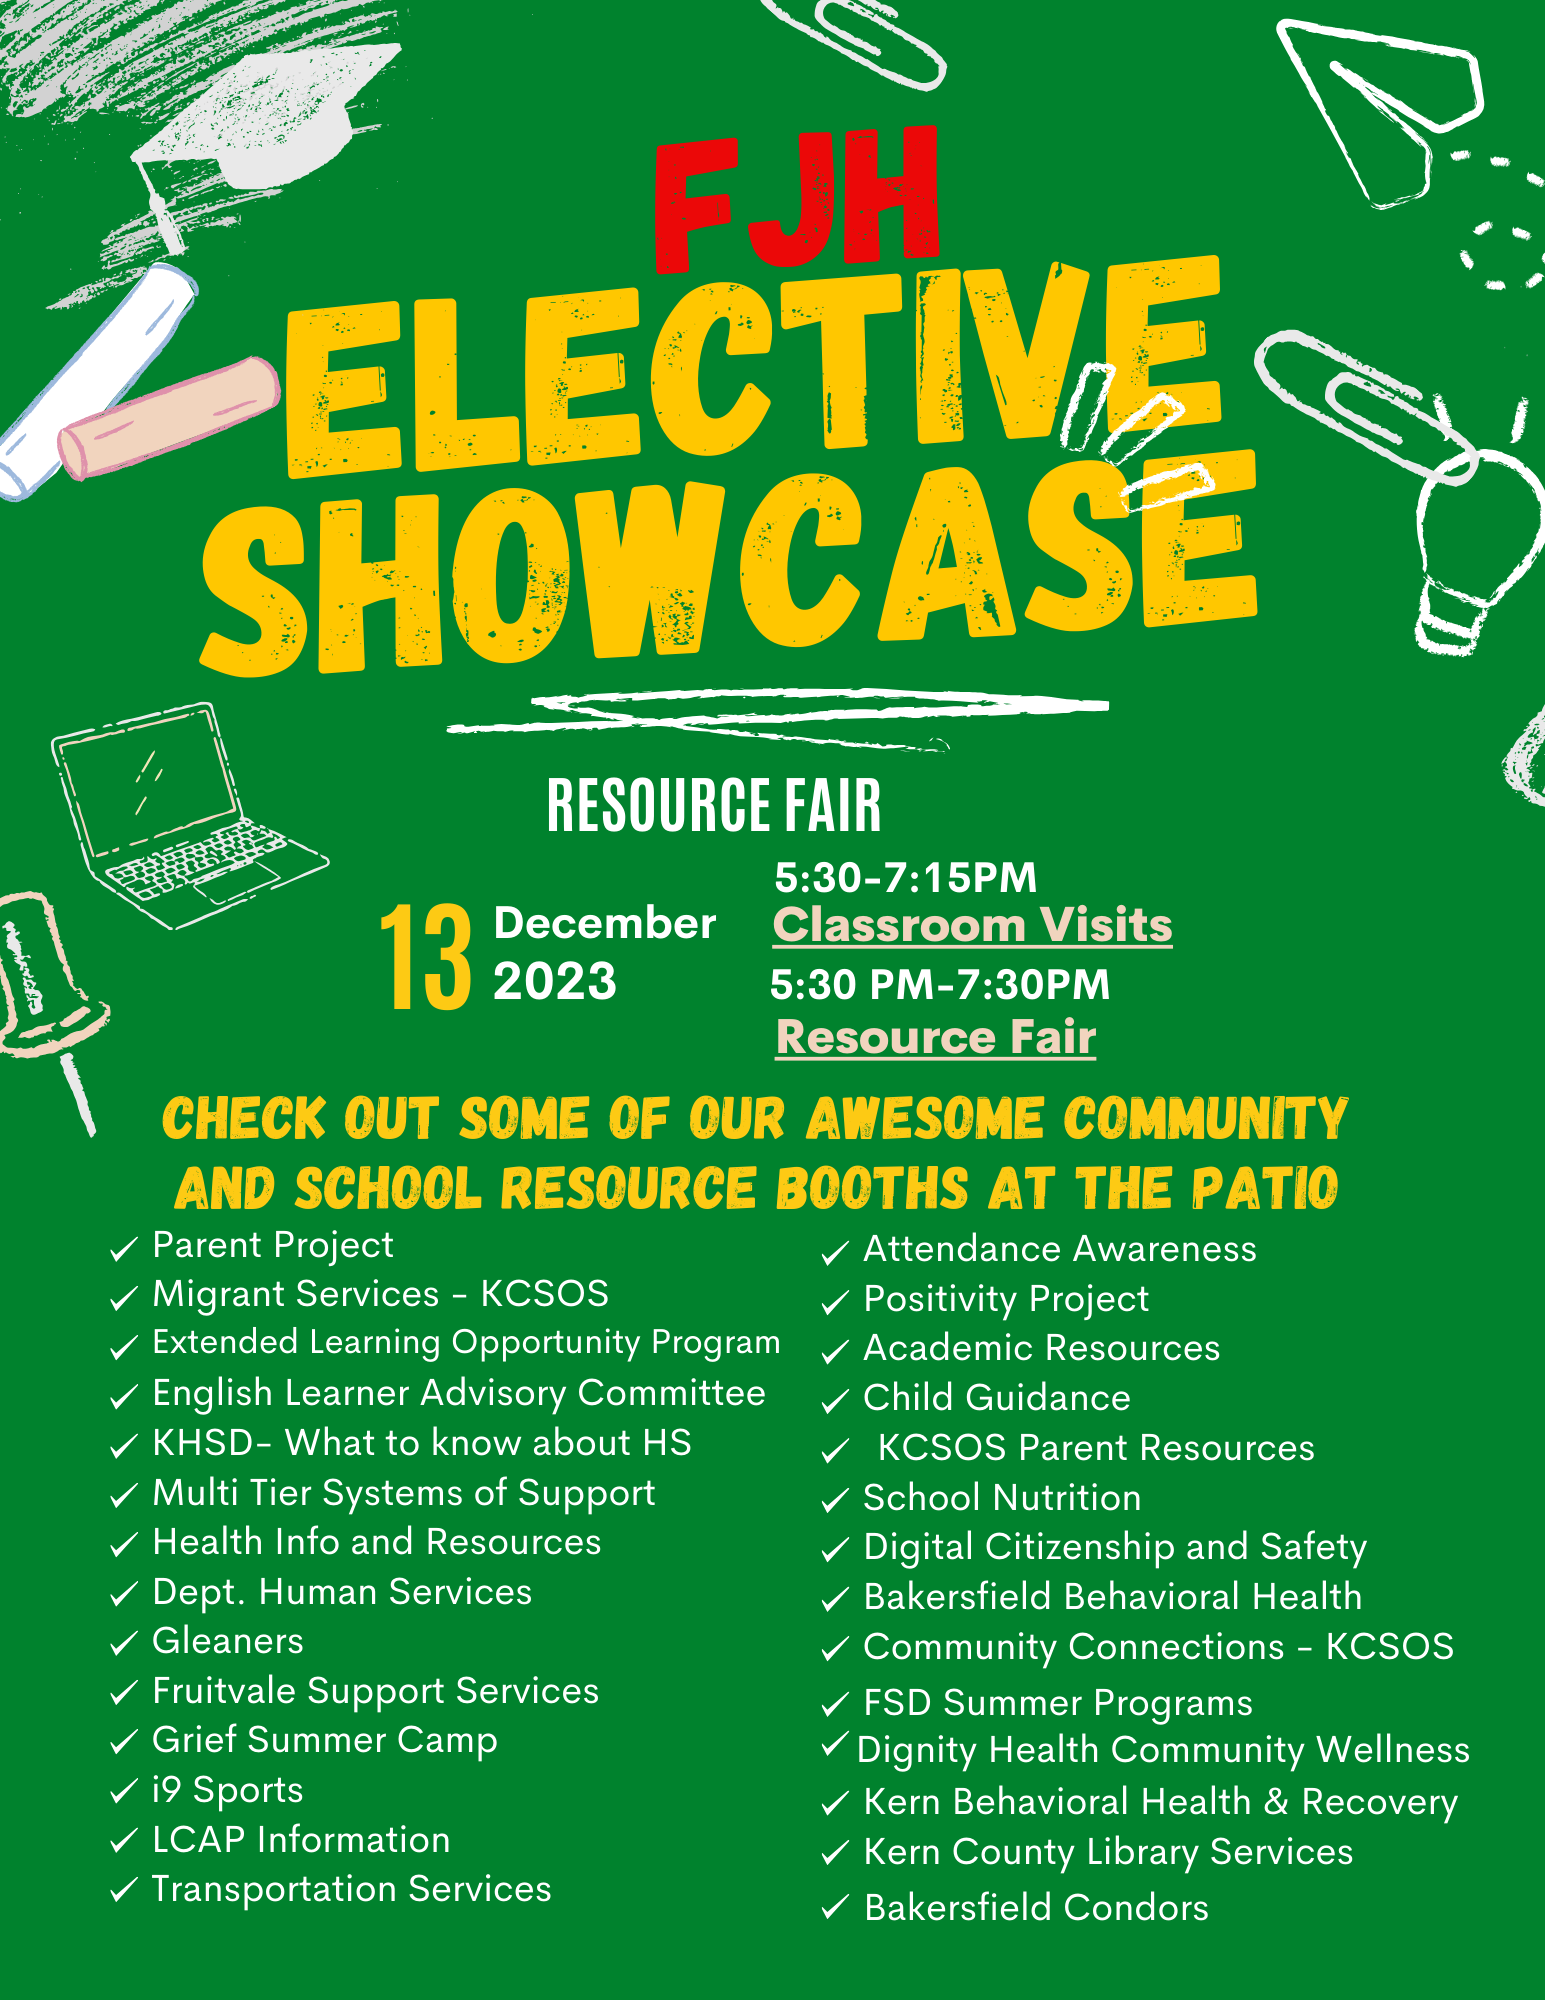 discover valuable resources for parents at our Resource Fair!  Resource tables will be set up  at the patio and include our resources such as Parent Project, Migrant Services, ELOP, ELAC, Kern High School District, MTSS, Health Information, Department of Human Services, Gleaners, Fruitvale Support Services, i9 Sports, LCAP, Attendance Awareness, Positivity Project, Academic Resources, Child Guidance, KCSOS Parent Resources, FSD Summer Programs, Bakersfield Condors and MORE!